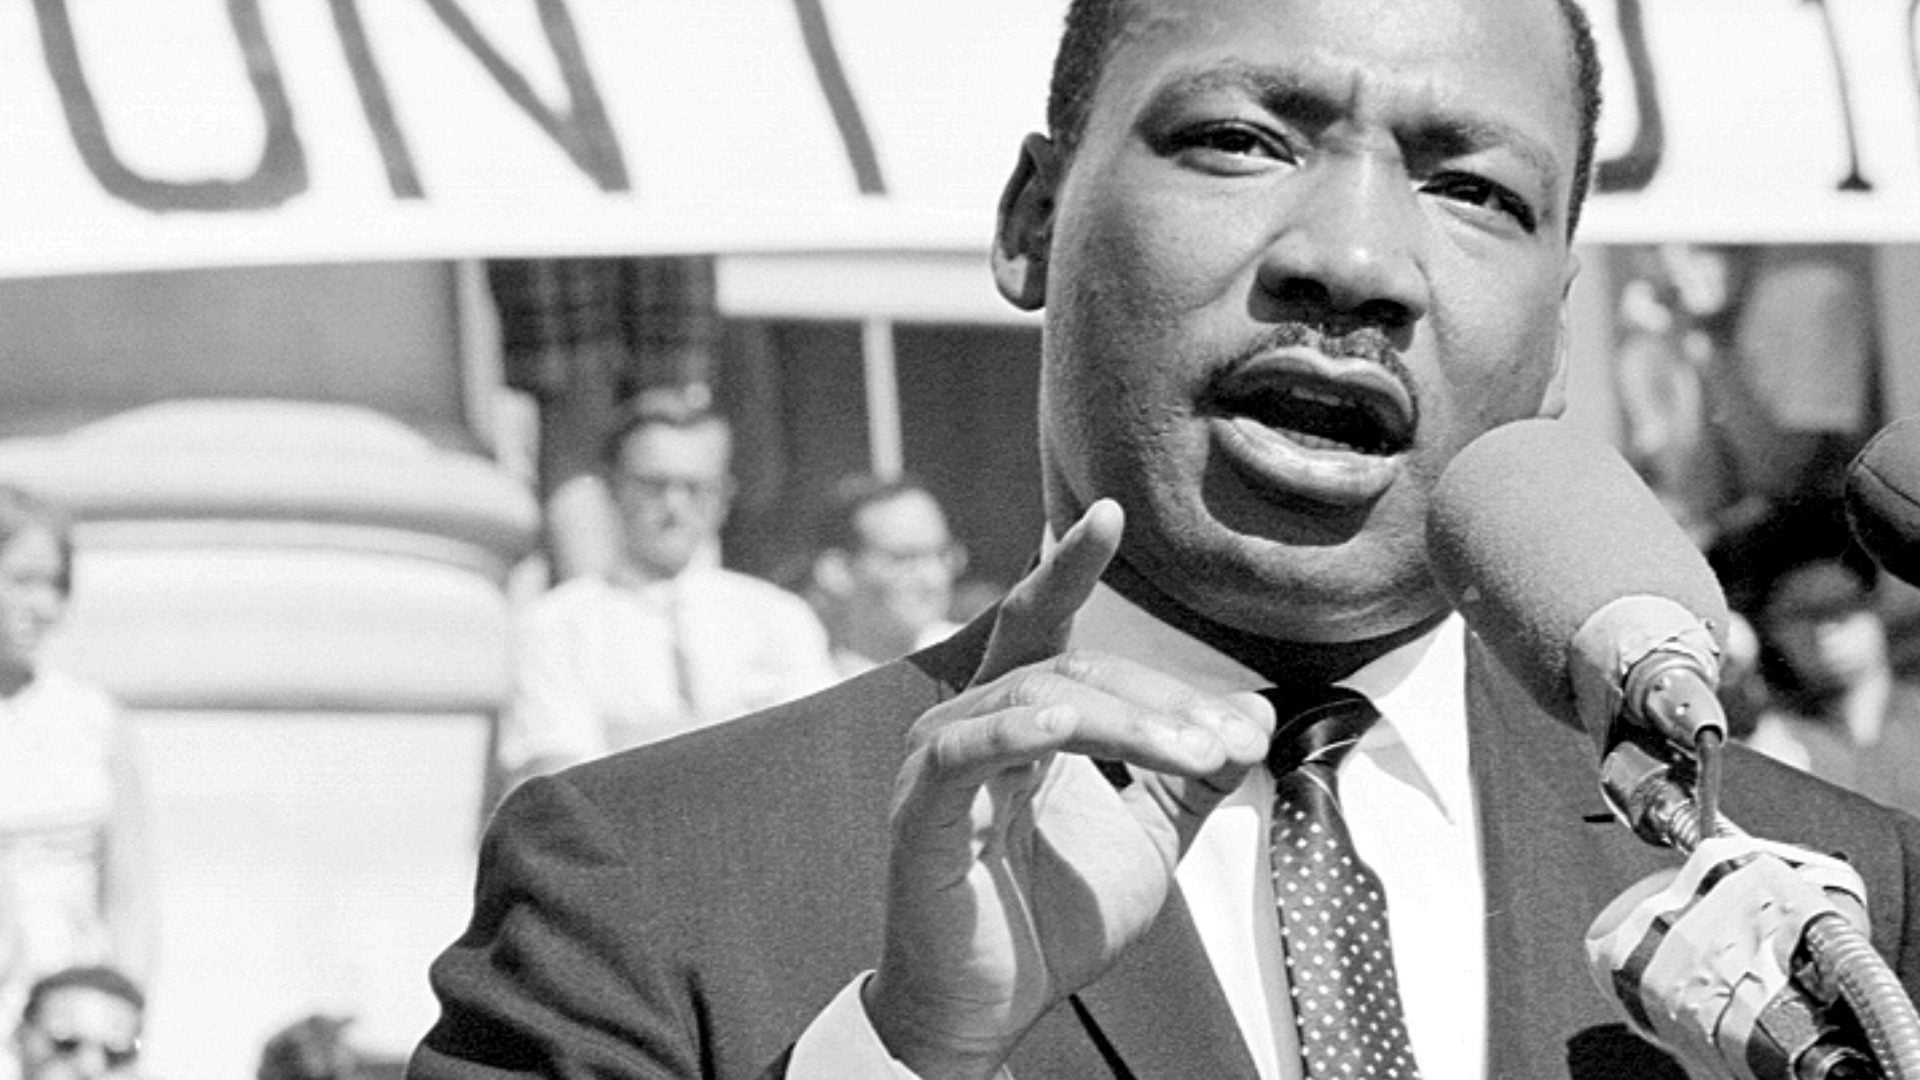 Right-Wing “Moms for Liberty” Group Wants ‘Anti-American’ MLK Jr. Book Banned From Schools